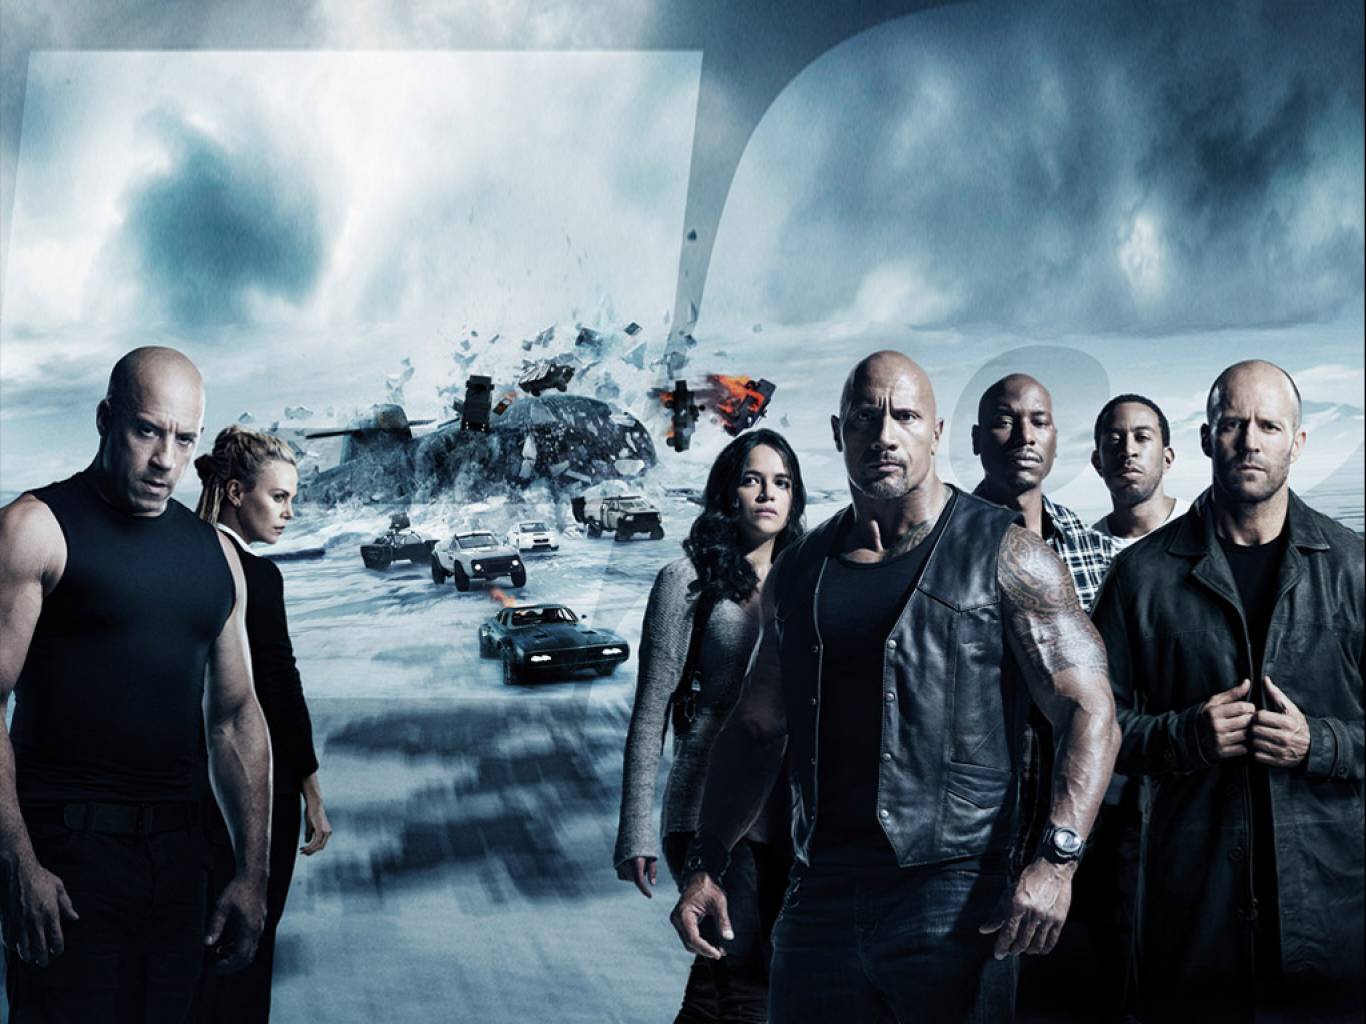 Fast 8 ( Fast and Furious 8) Movie HD Wallpaper. Fast 8 ( Fast and Furious 8) HD Movie Wallpaper Free Download (1080p to 2K)